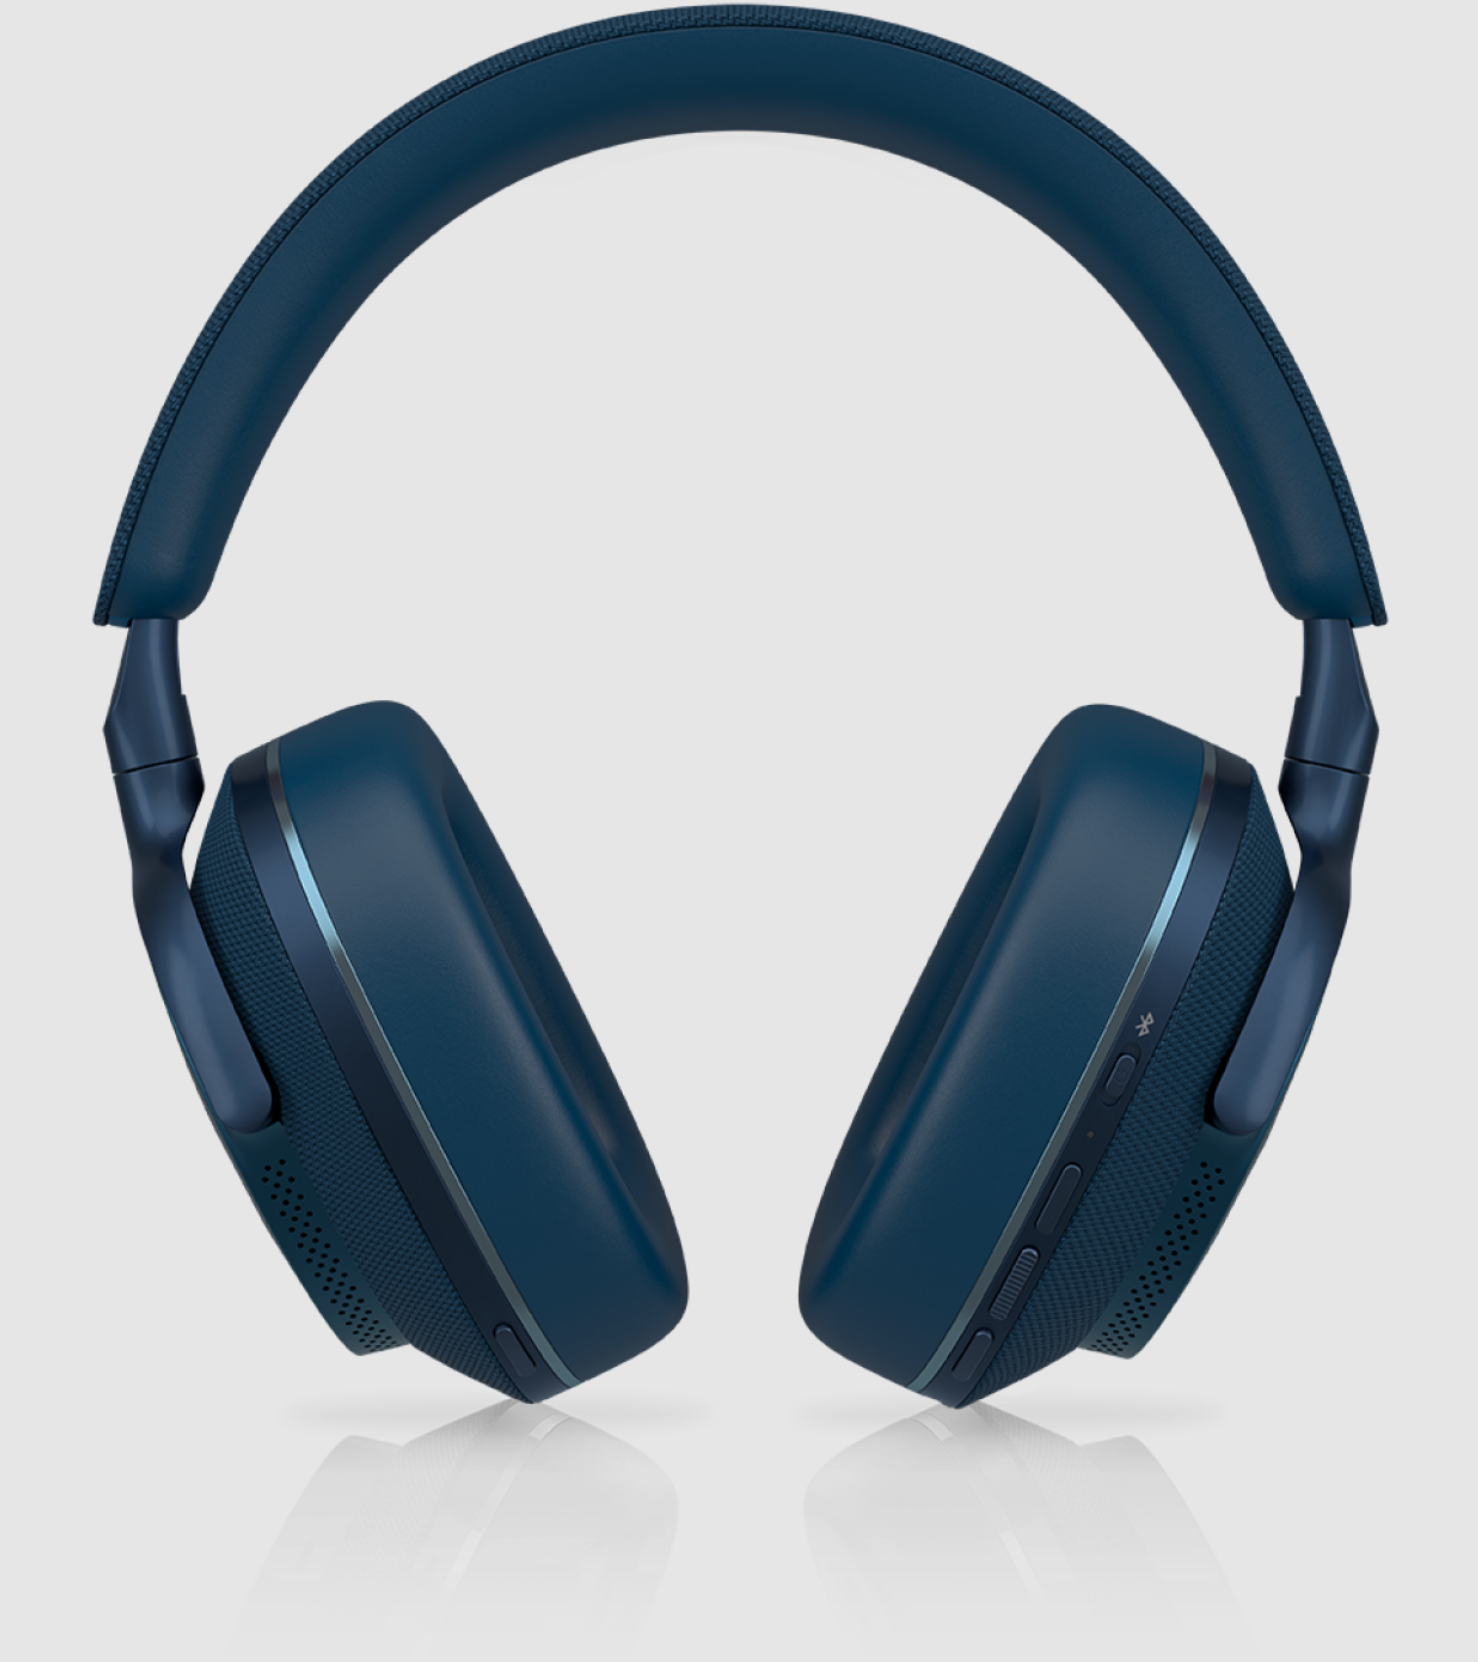 B&W Px7 S2e Noise Cancelling Headphones in Ocean Blue. Image shows controls